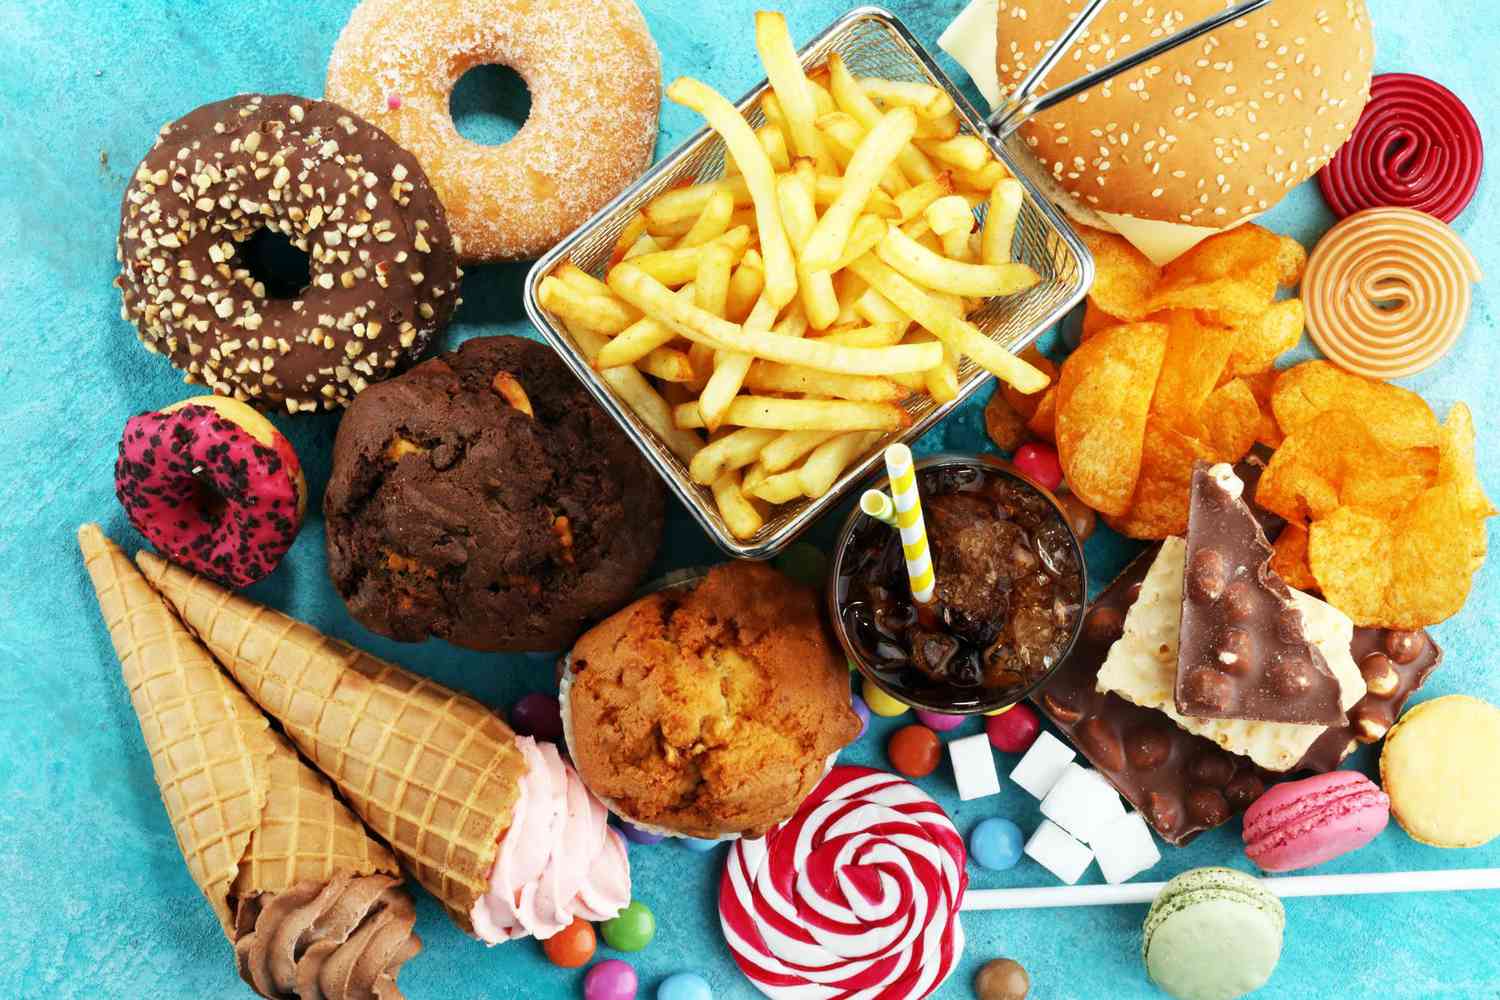 Why There Are No 'Bad Foods' | Parents